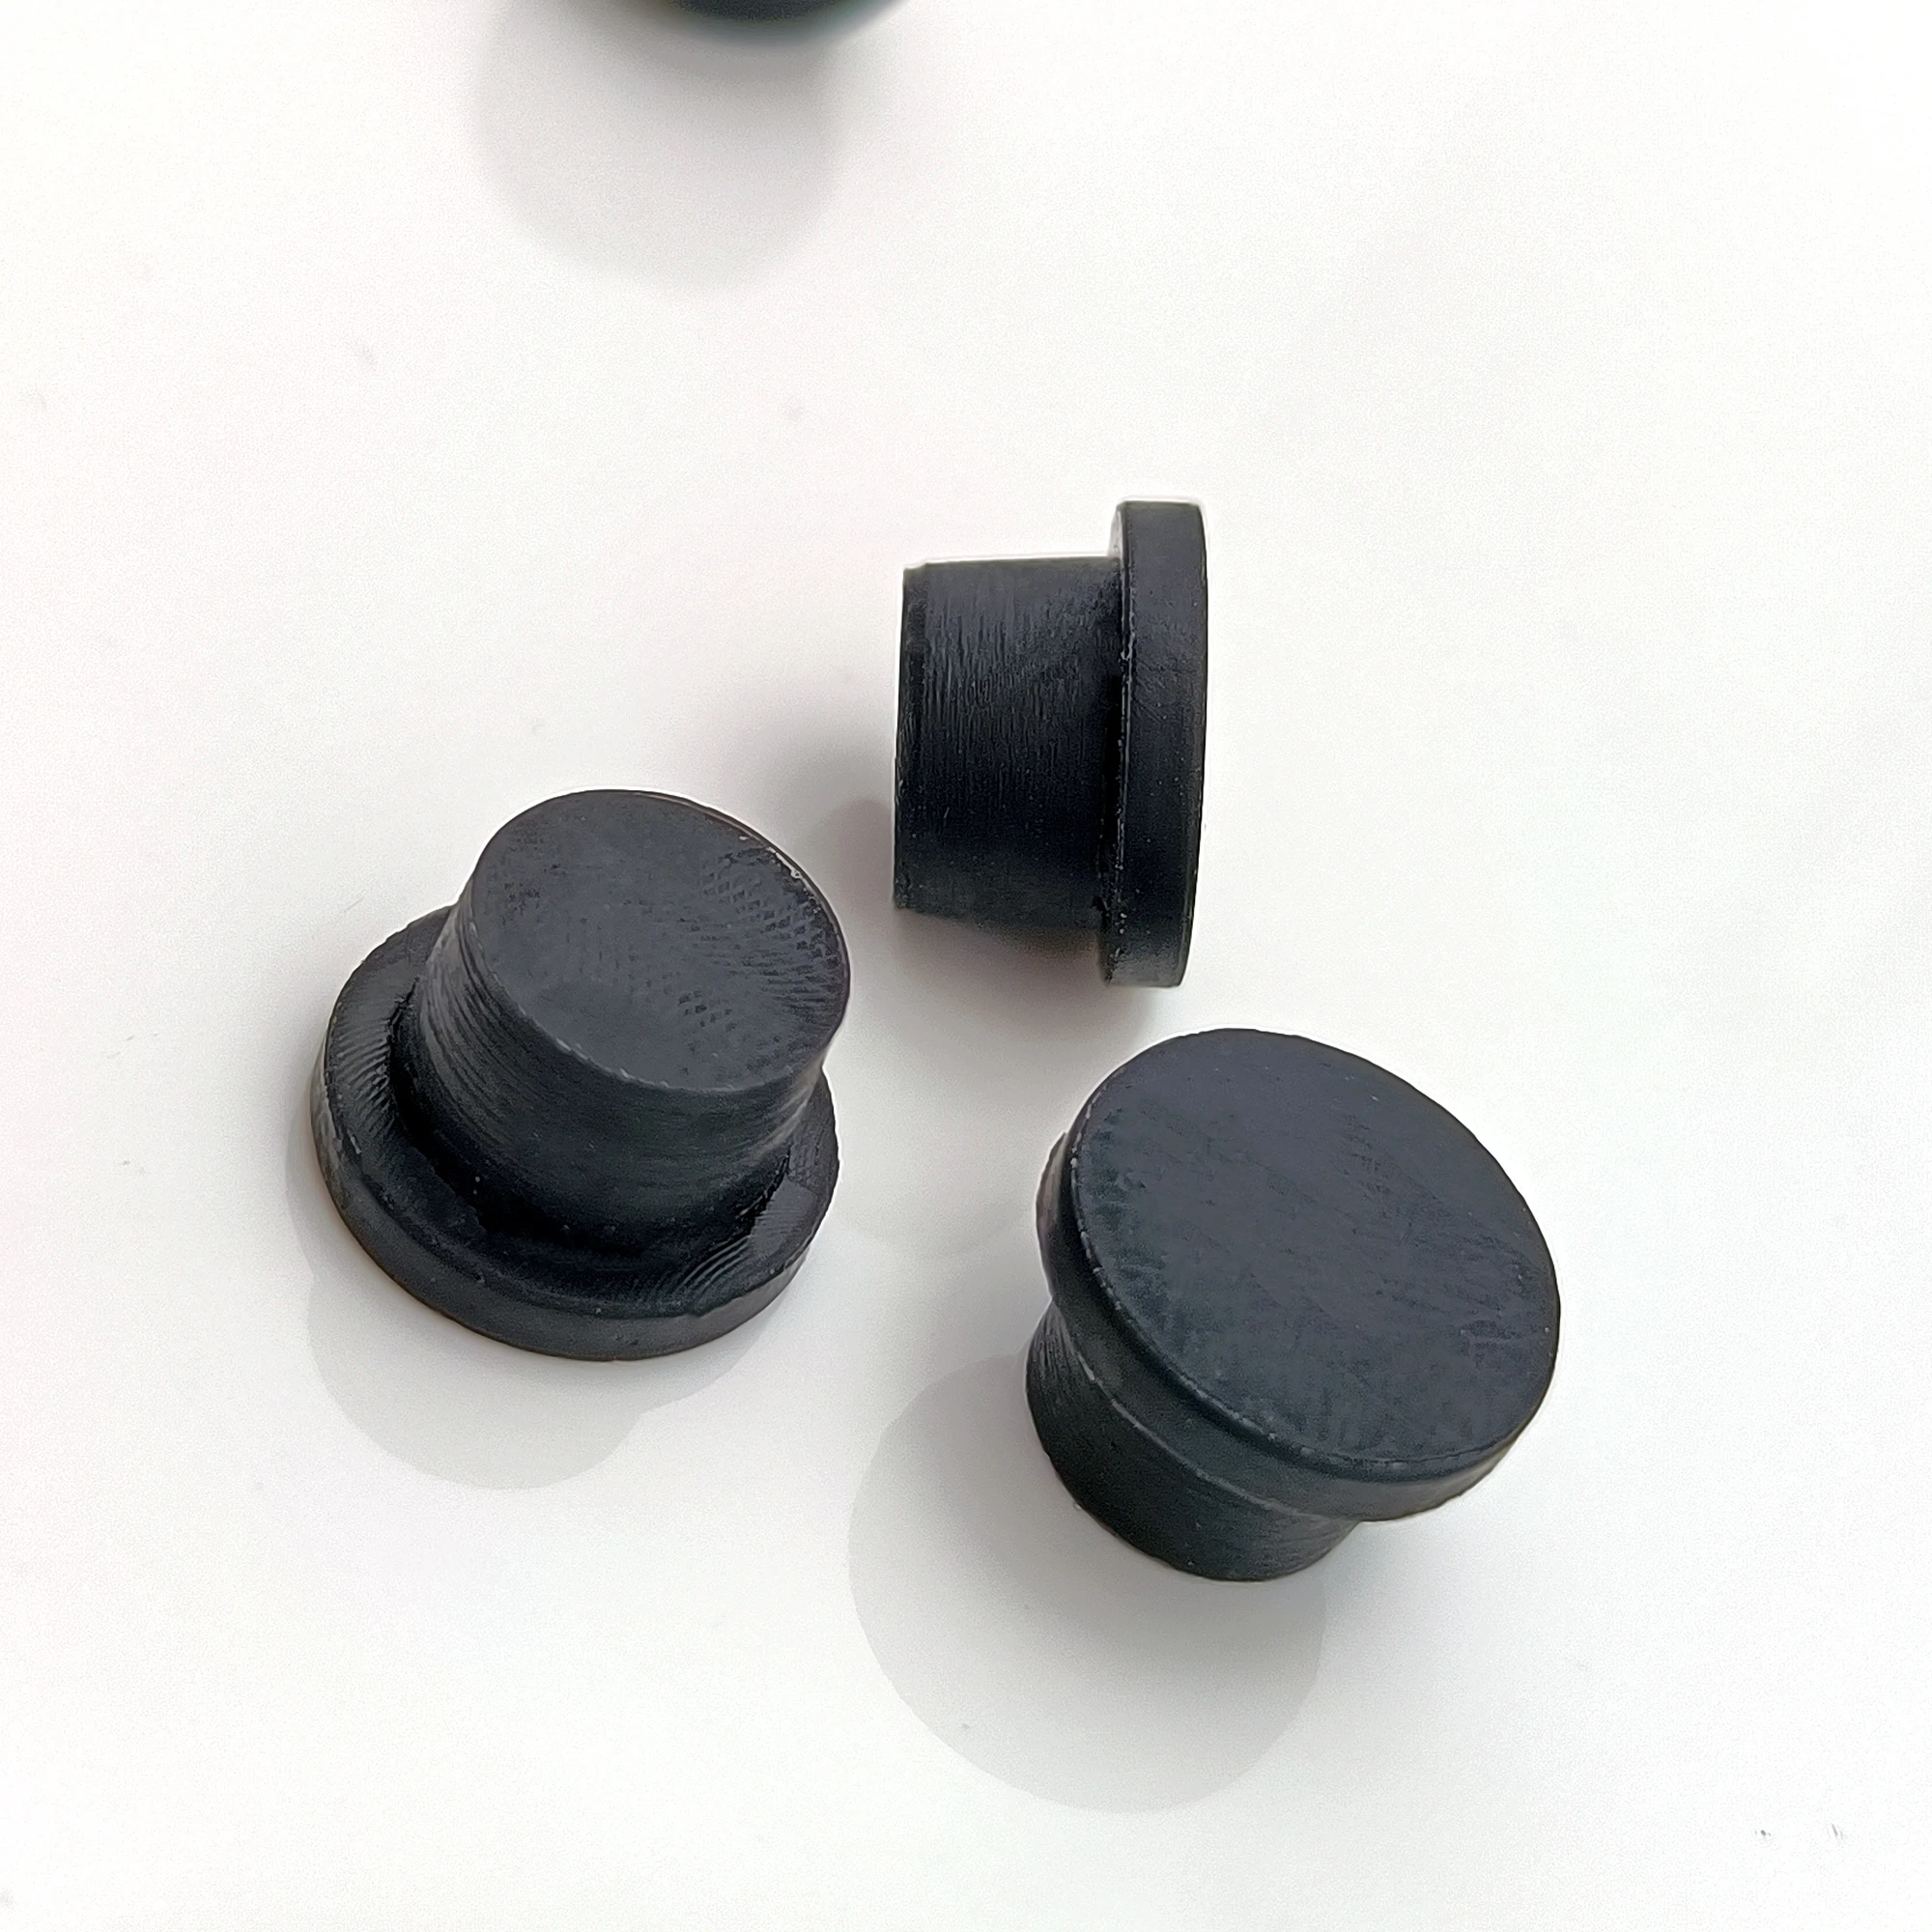 
China Manufacturer High Quality Silicone Rubber Stopper/rubber Cap/rubber Plug A-7.5 